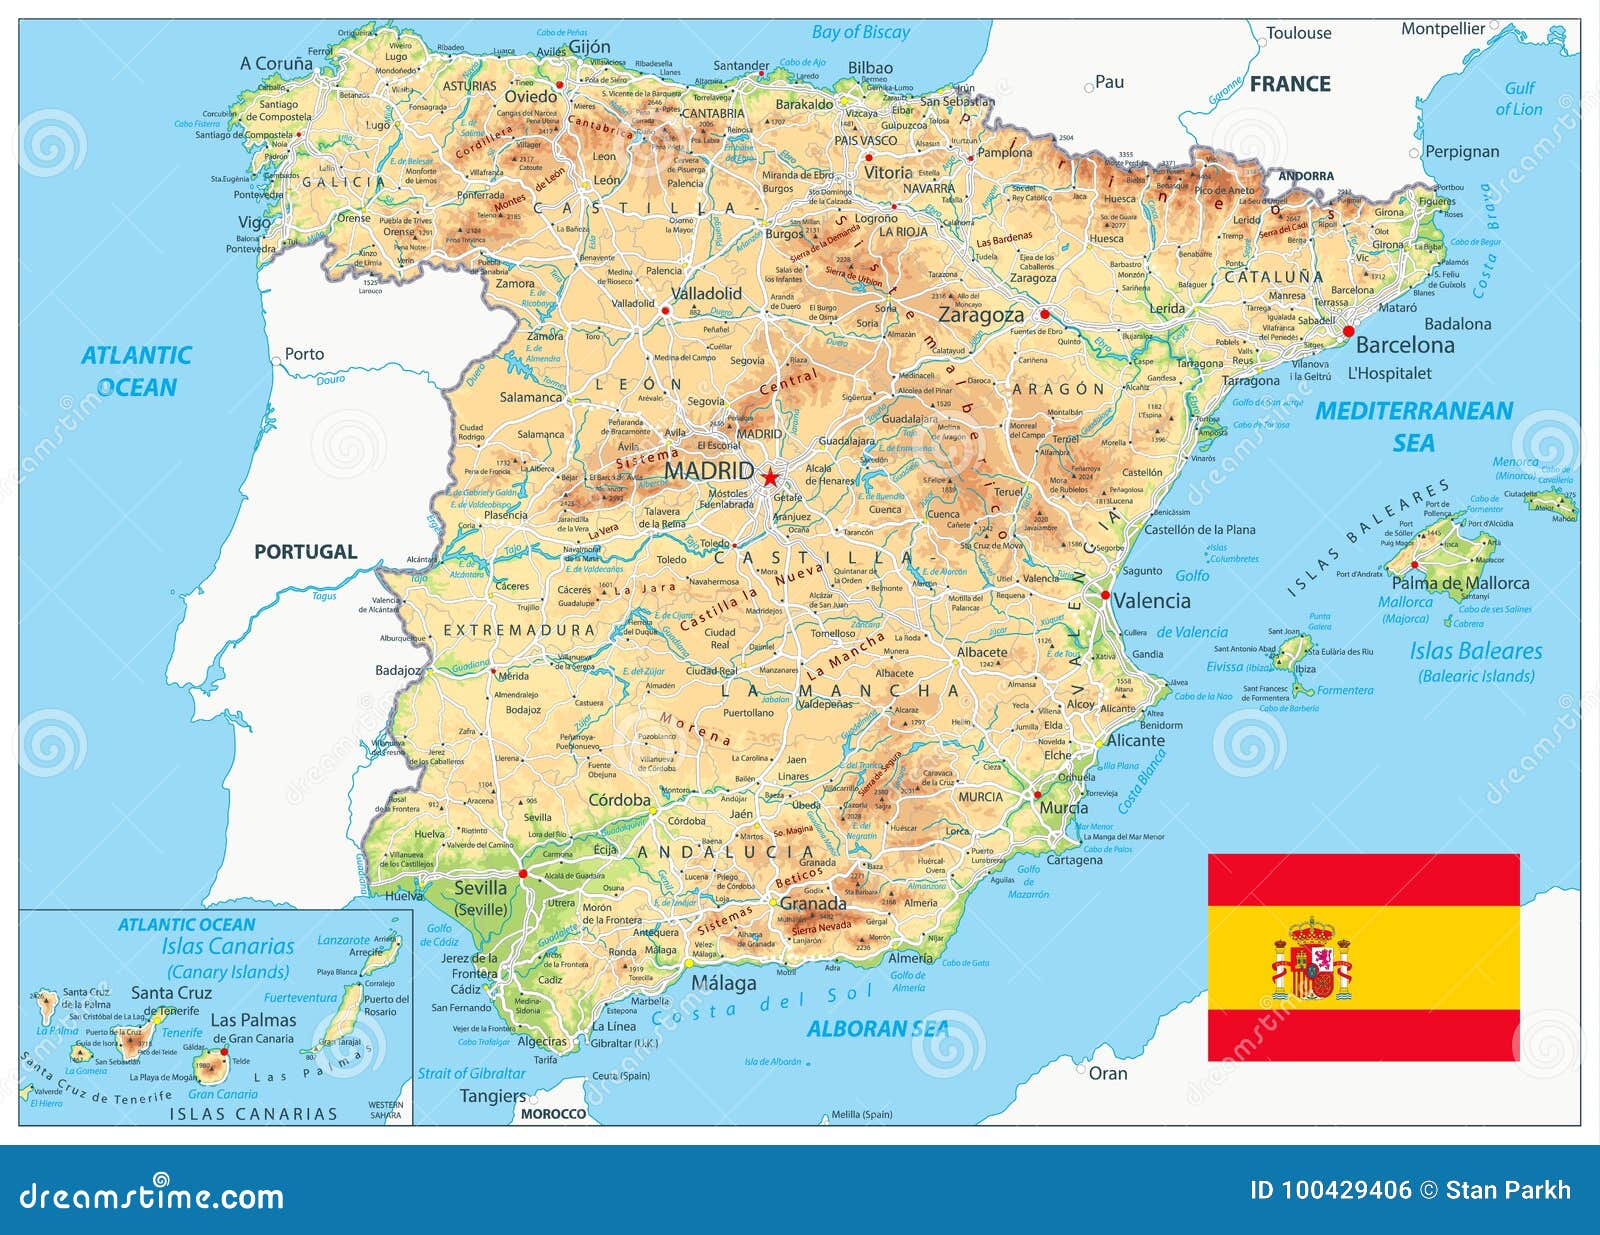 spain physical map